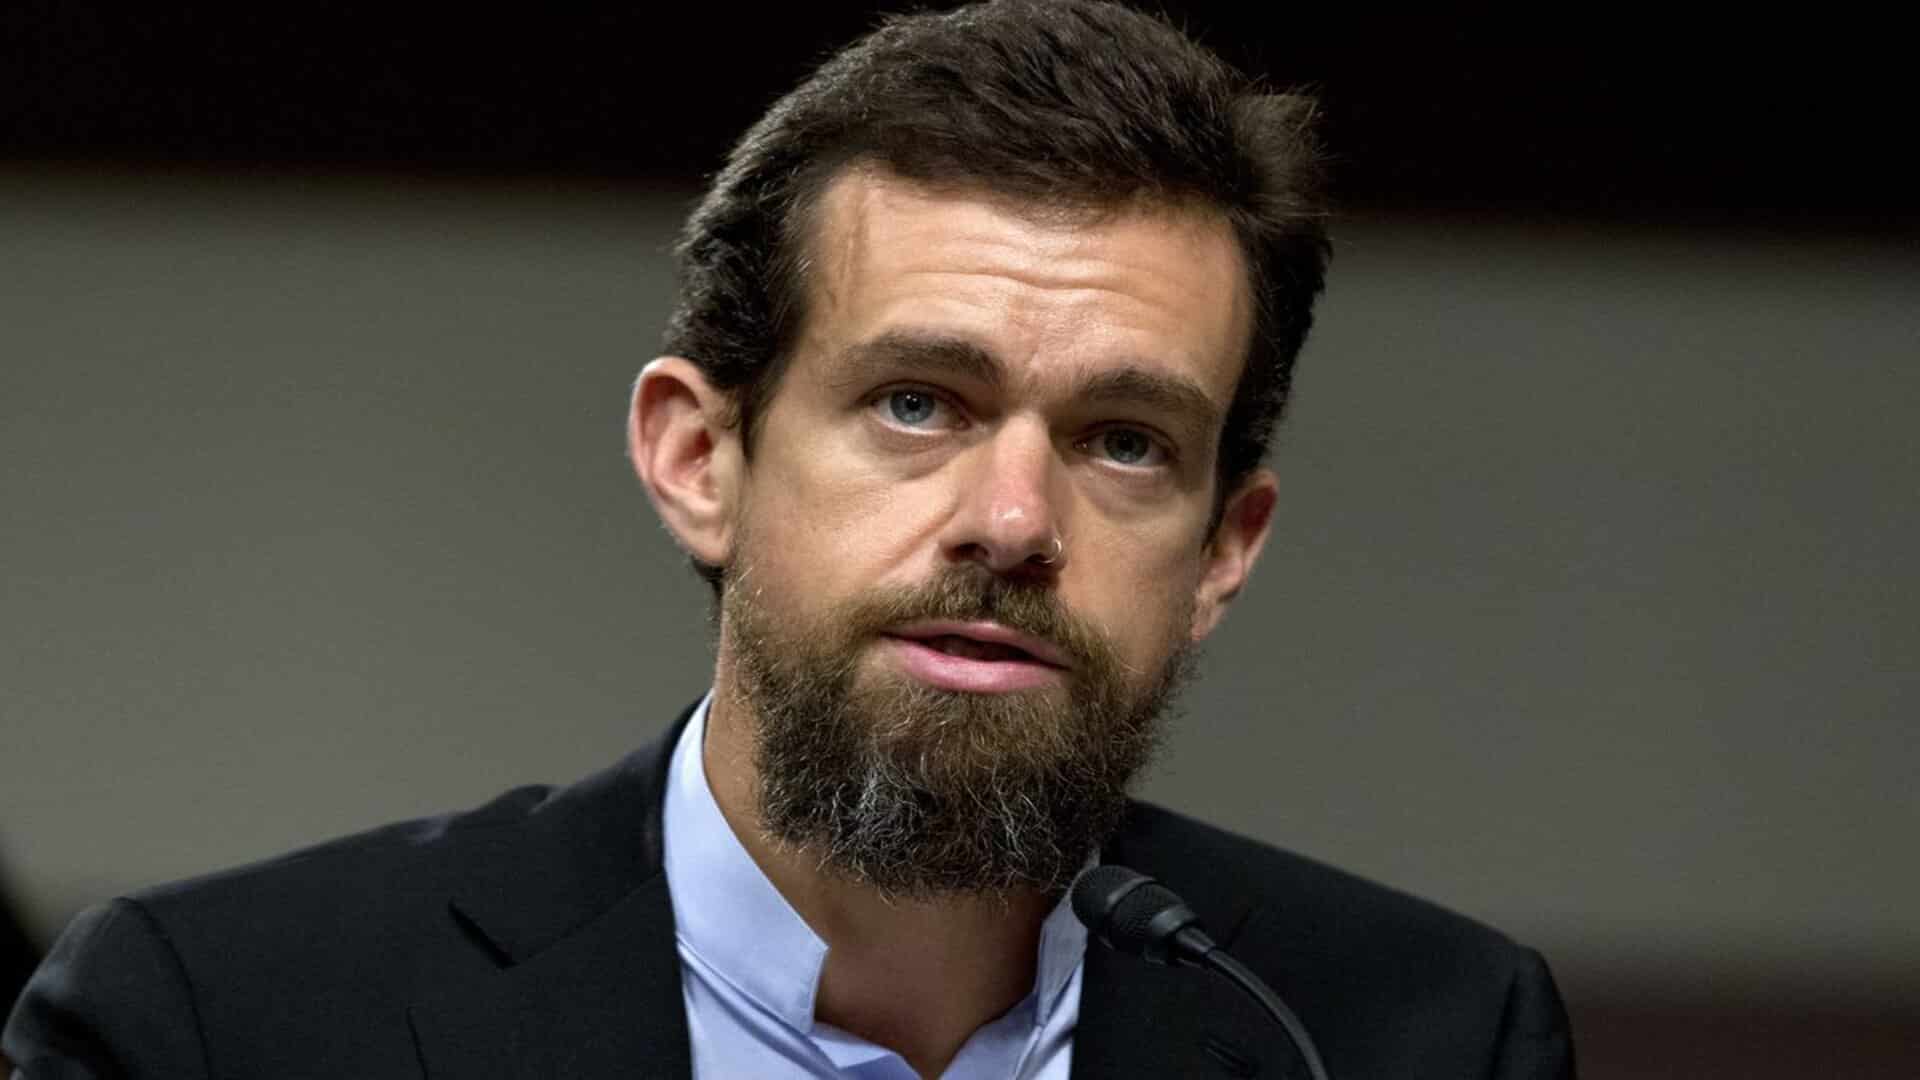 Jack Dorsey set to step down as Twitter chief, Parag Agrawal to take over